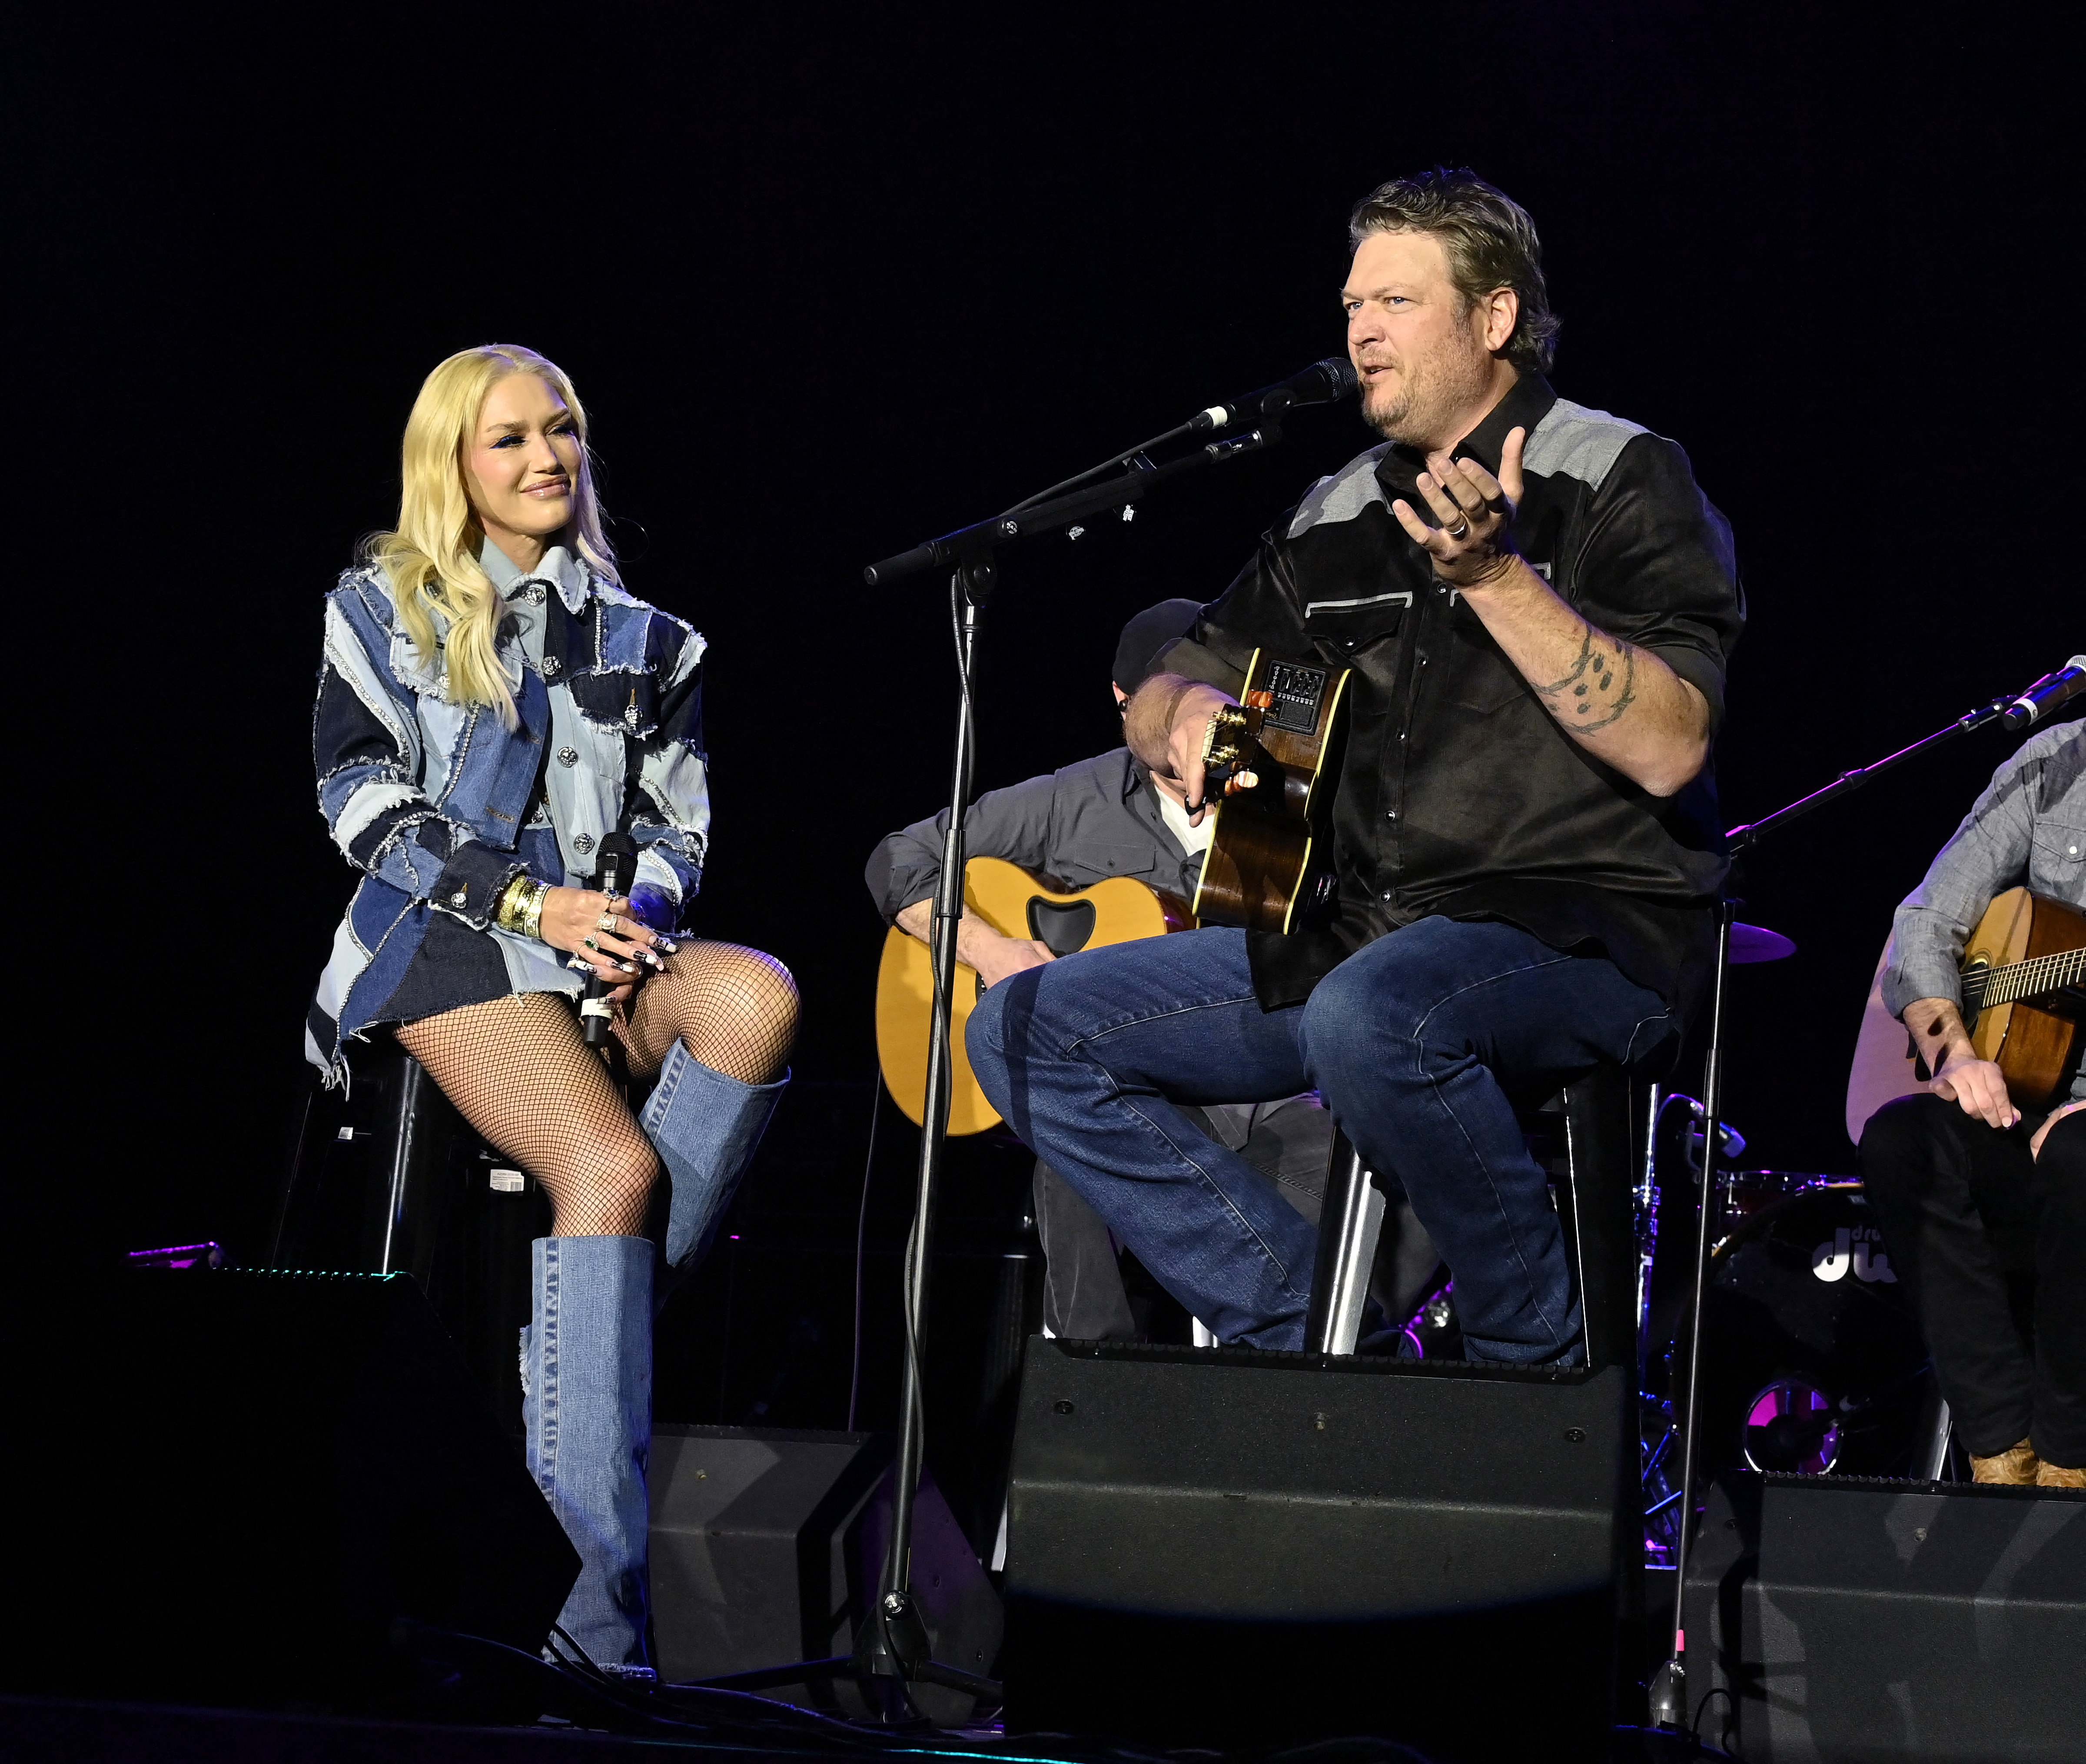 Gwen and Blake performed together at a concert in Feb 2024